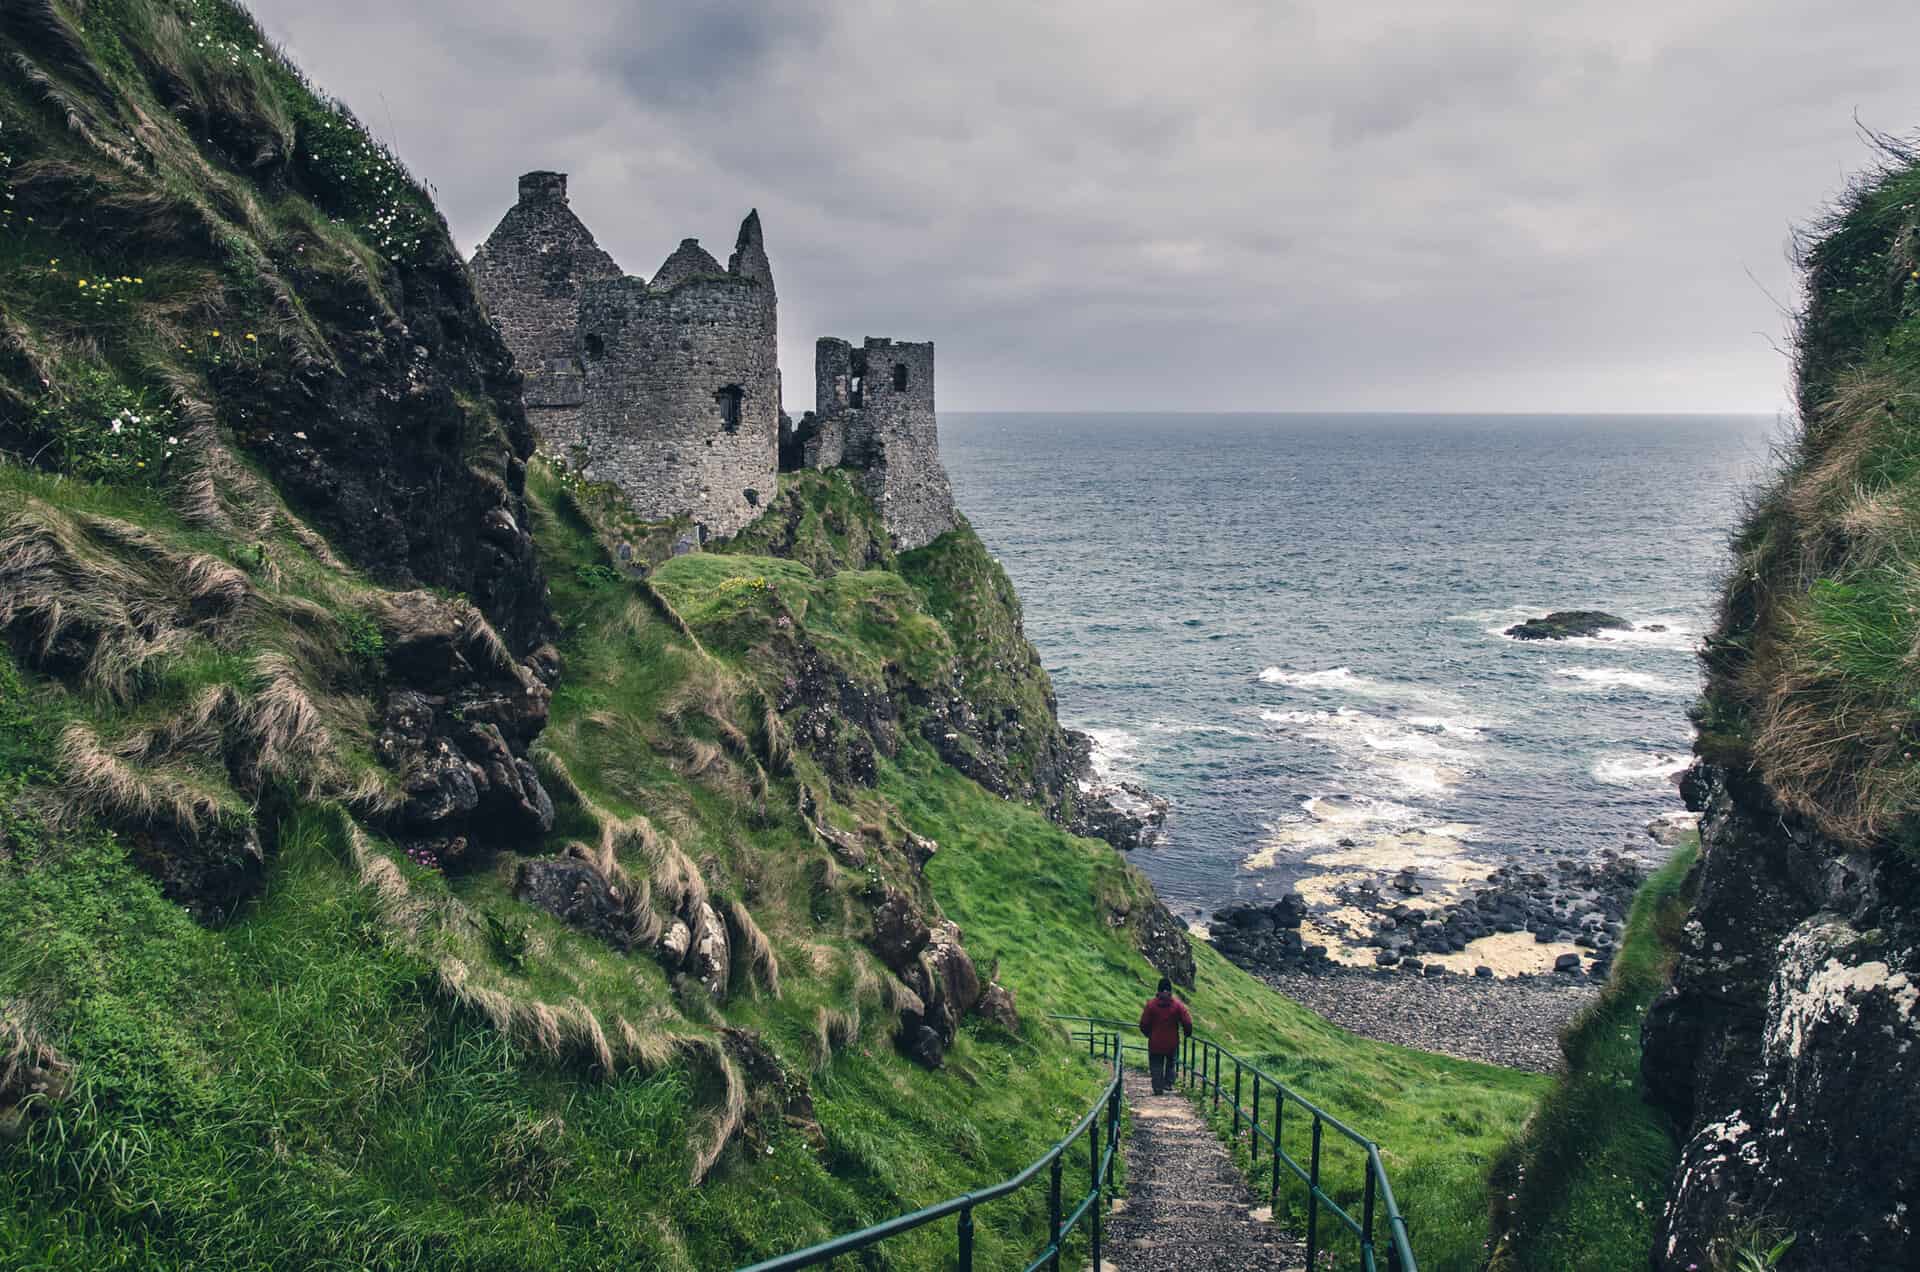 What's the best time to visit Ireland?